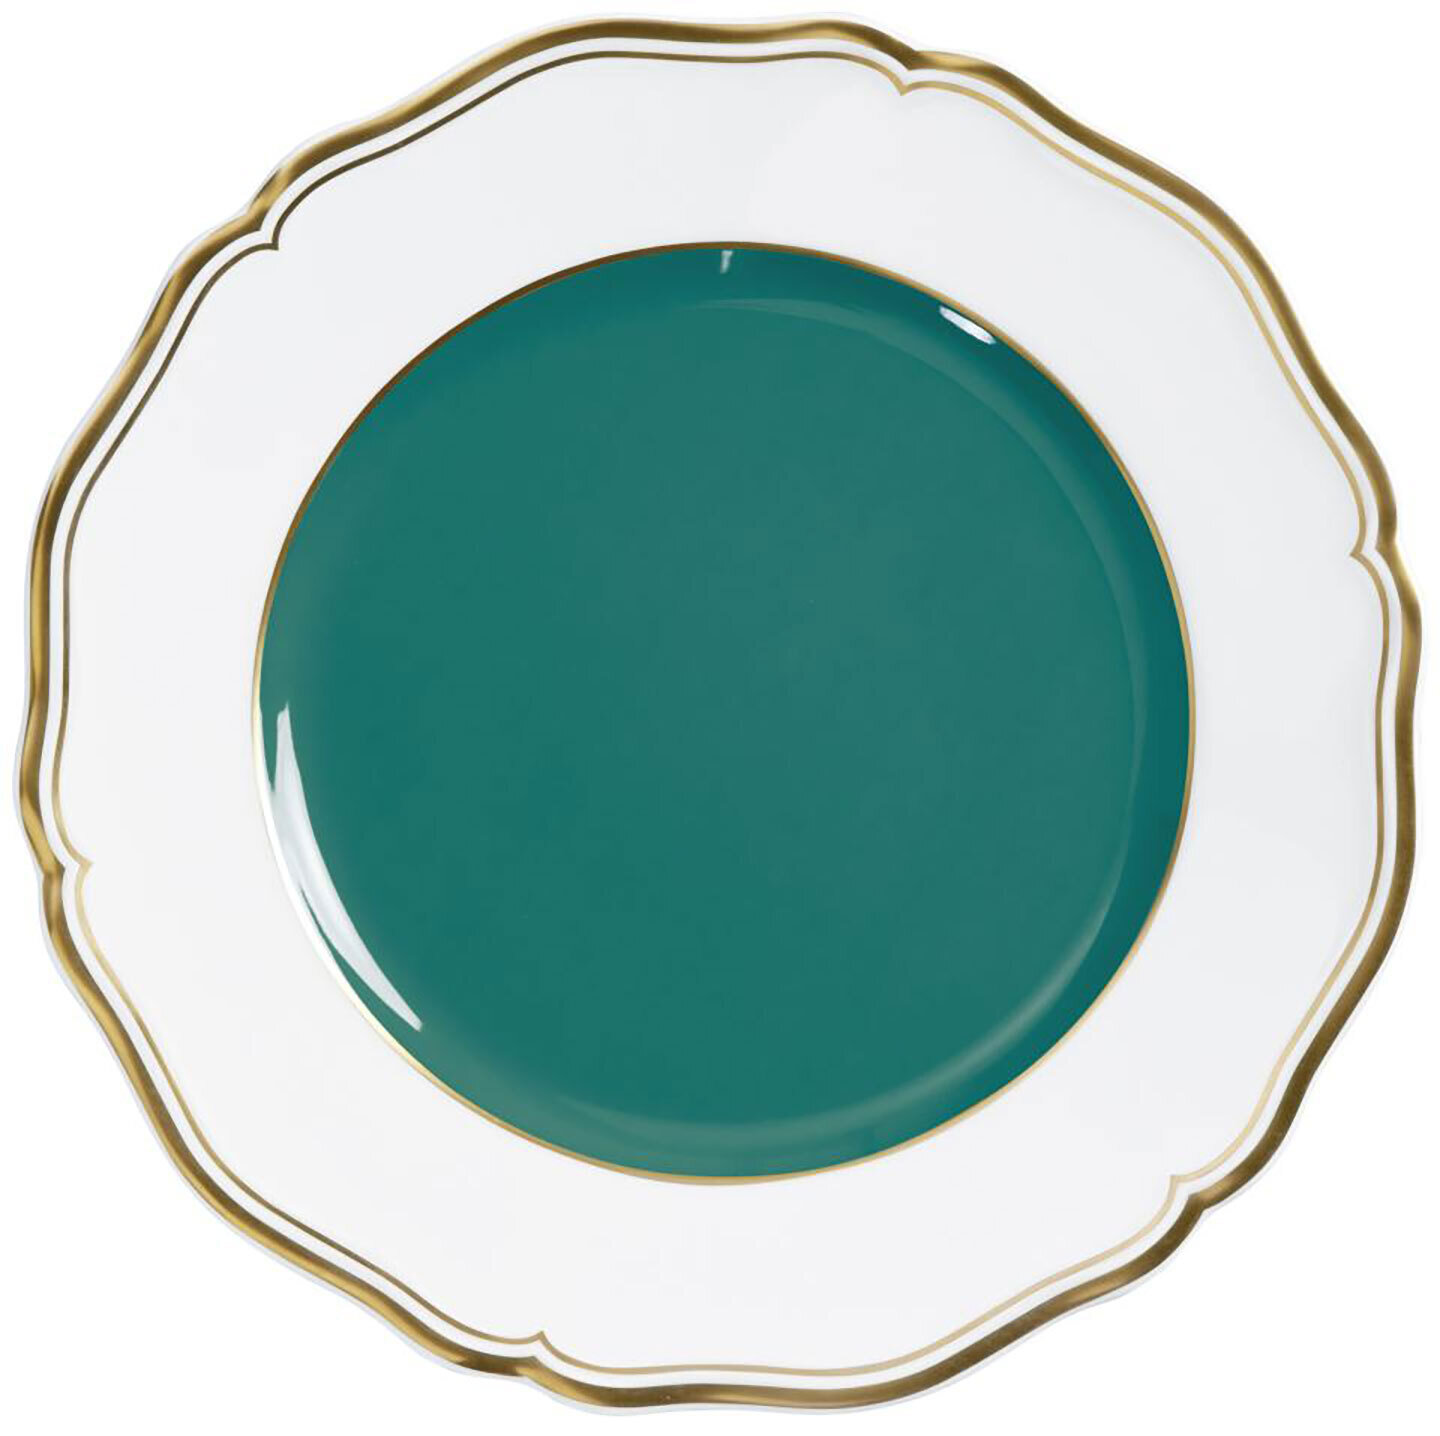 Raynaud Limoges Mazurka Or Turquoise Dessert Plate 8.7 Inch 0871-01-101022